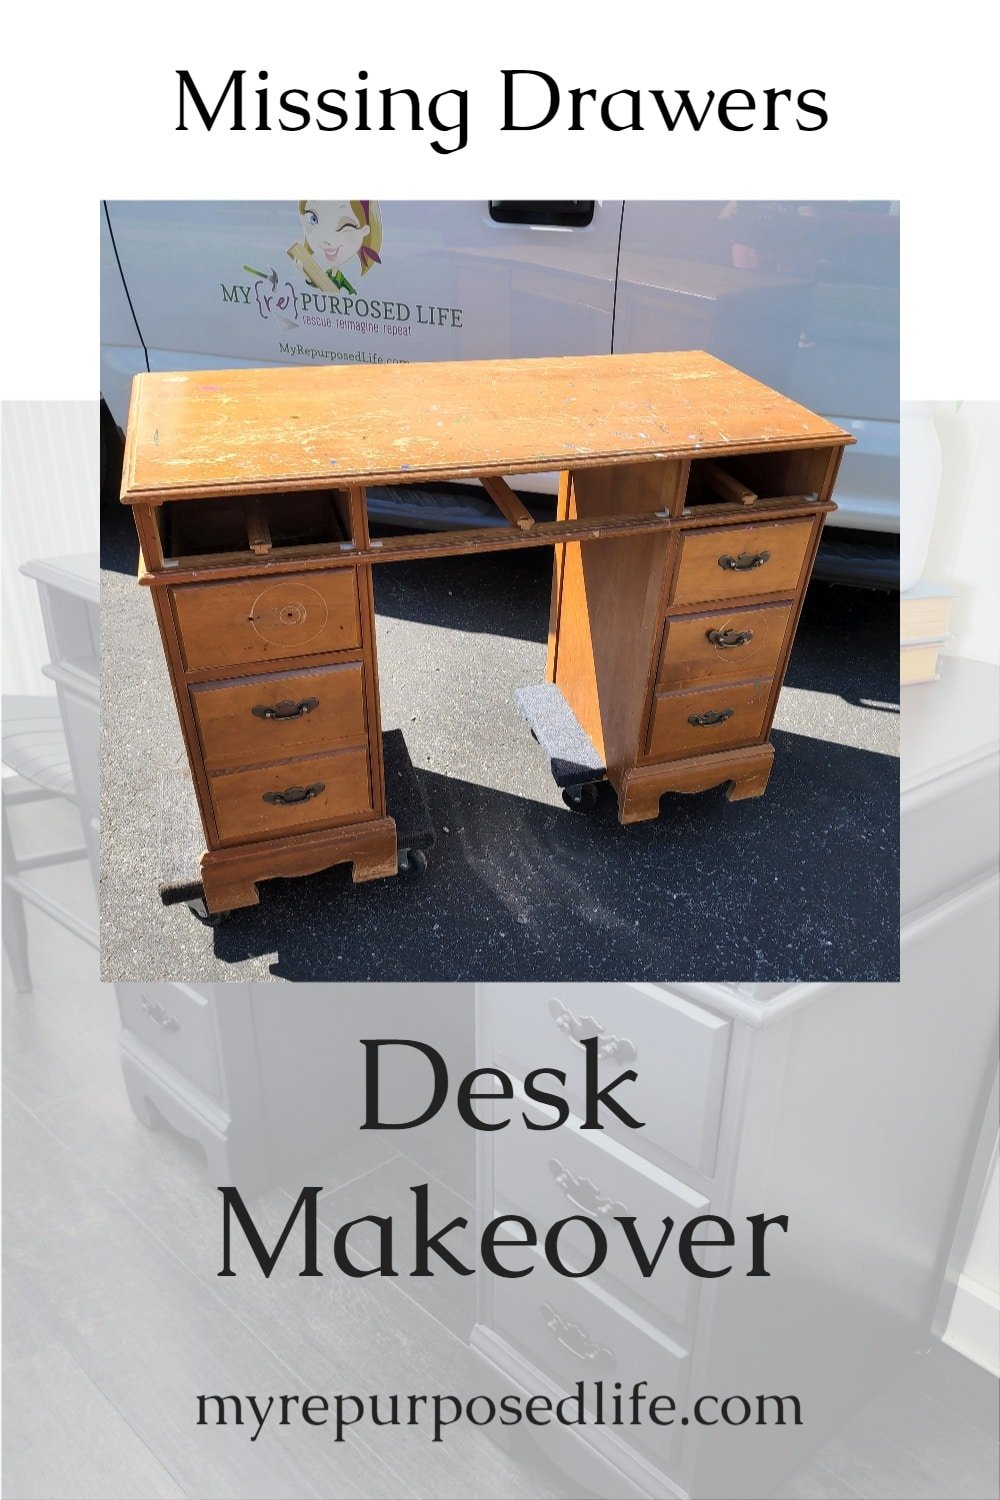 How to makeover a vintage desk with missing drawers. Tips for adding shelves, peek a boo drawers and more. A small desk is perfect for any room in the house. #MyRepurposedLife #desk #makeover #upcycle #missingdrawers #allinonepaint via @repurposedlife